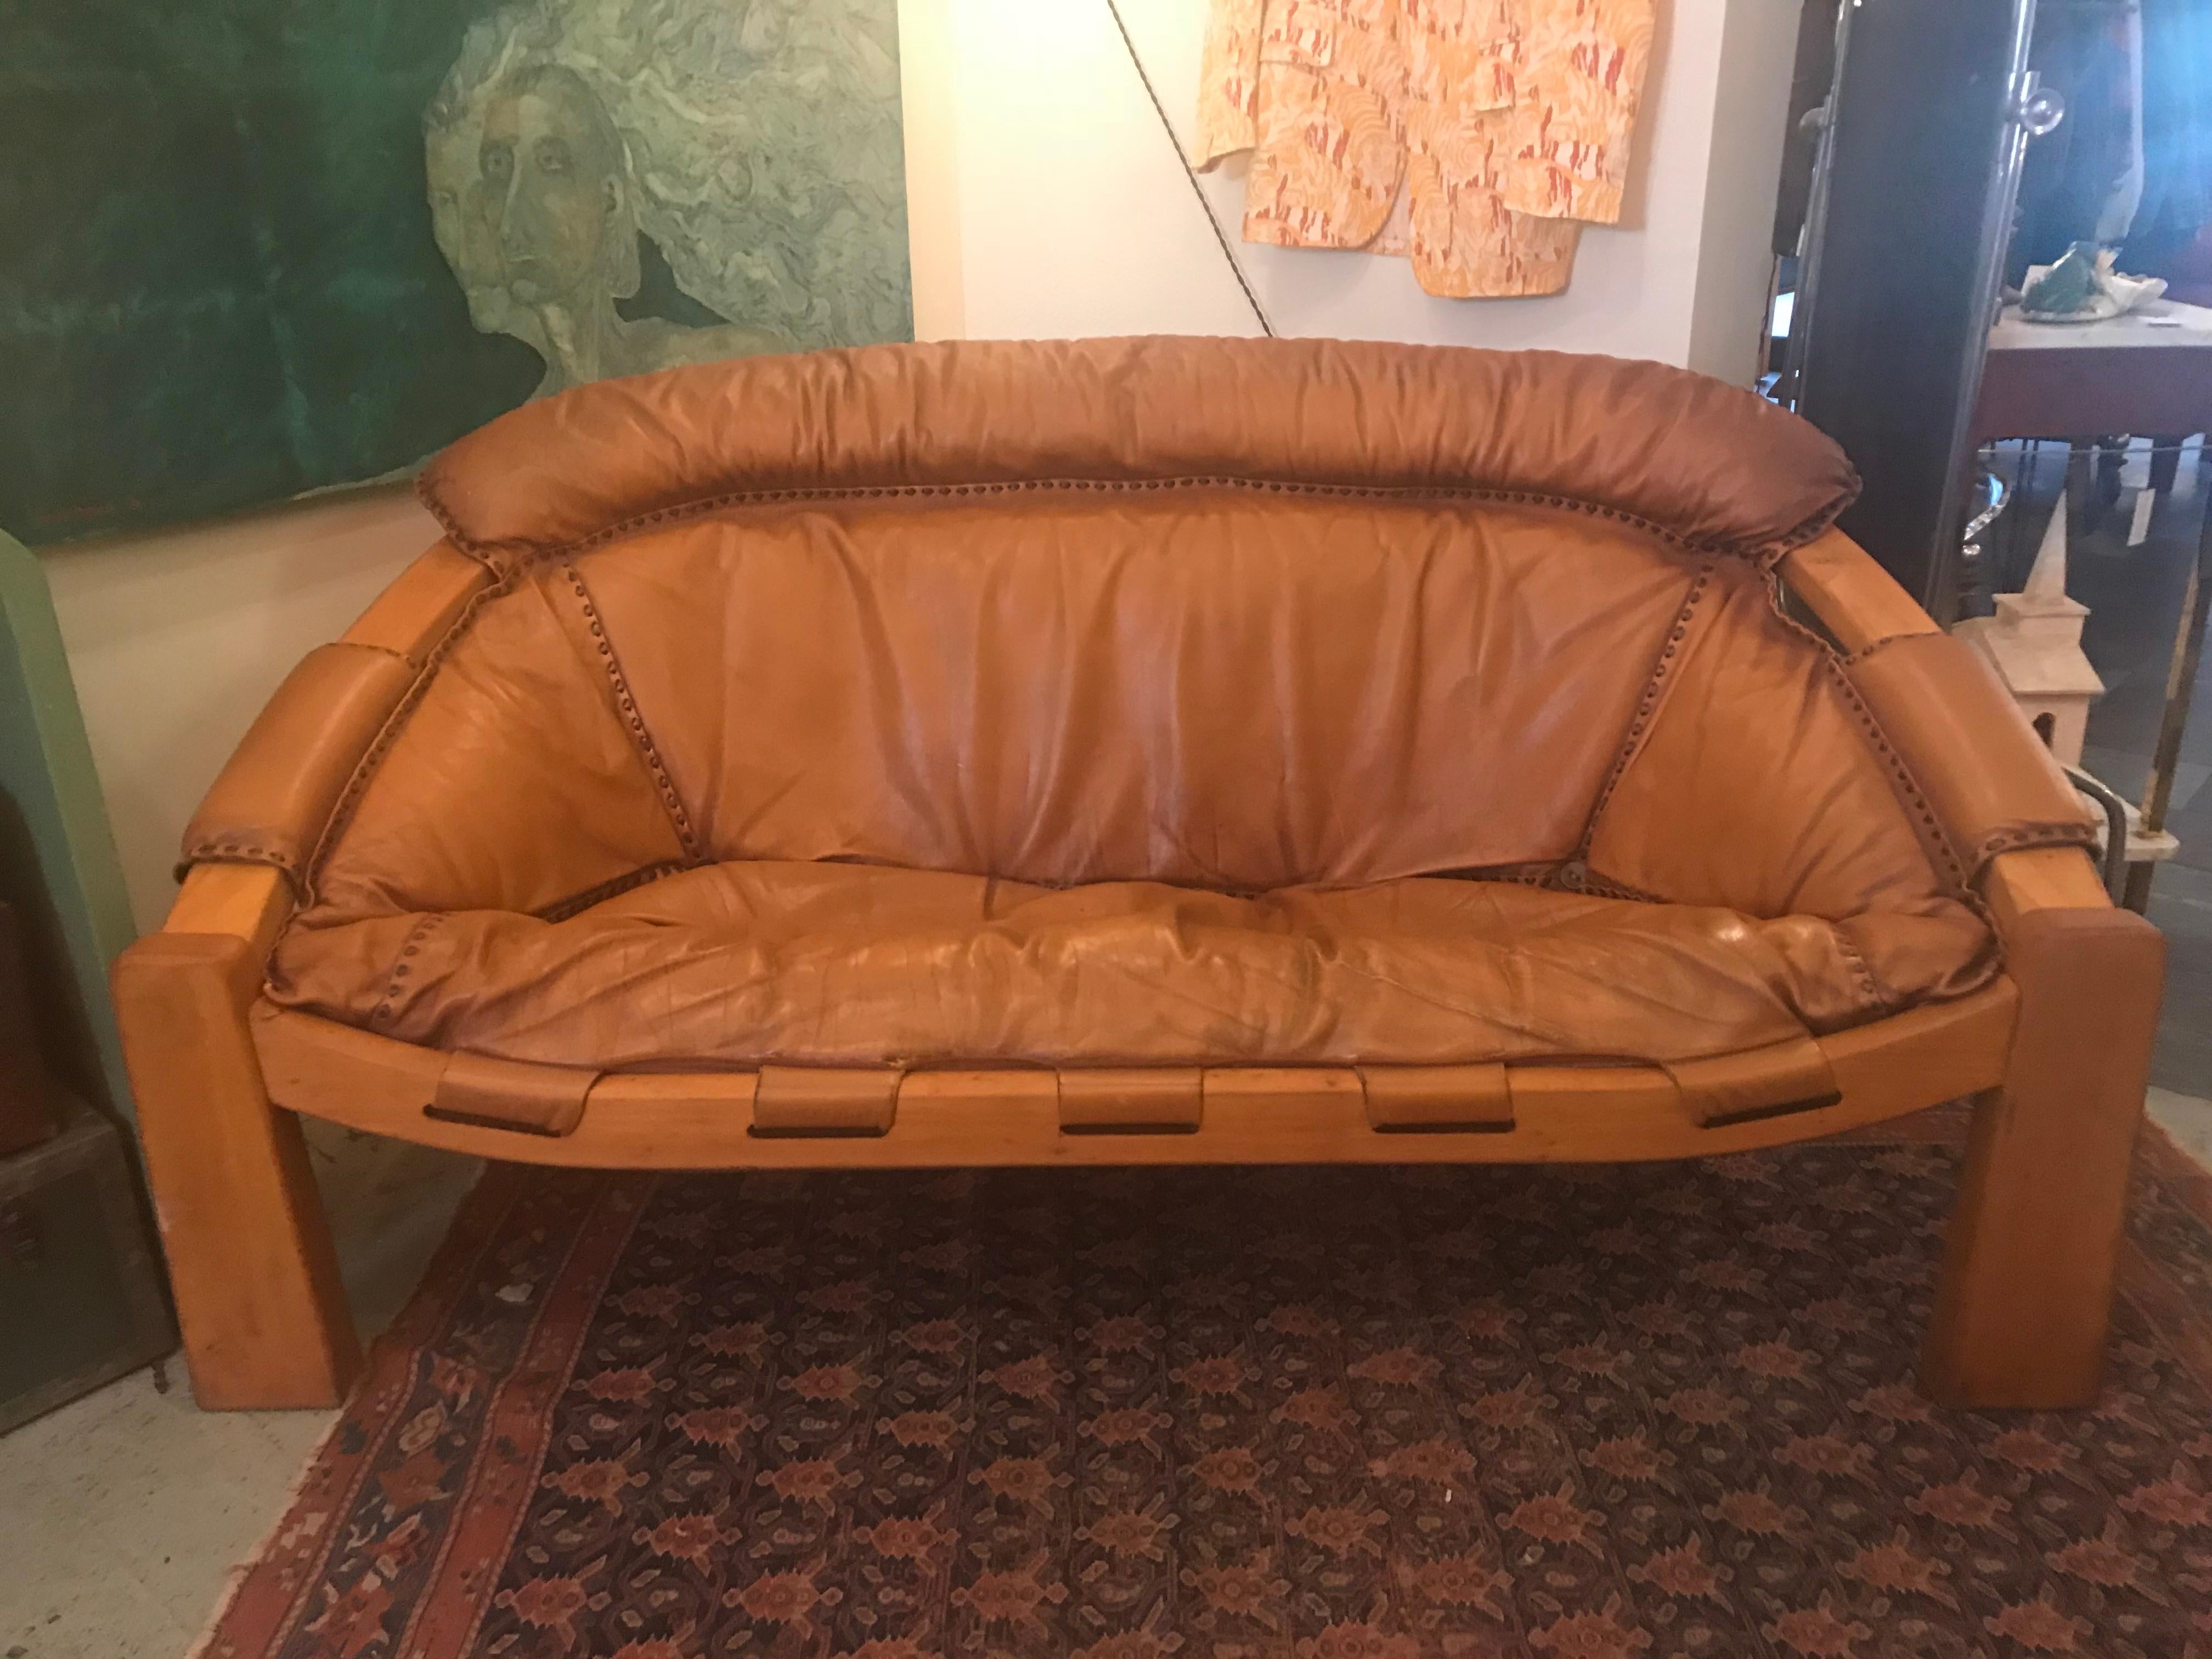 This is a rare and unique midcentury cognac leather sofa with dark brown stitching in the manner of Brazilian designer Percival Lafer.